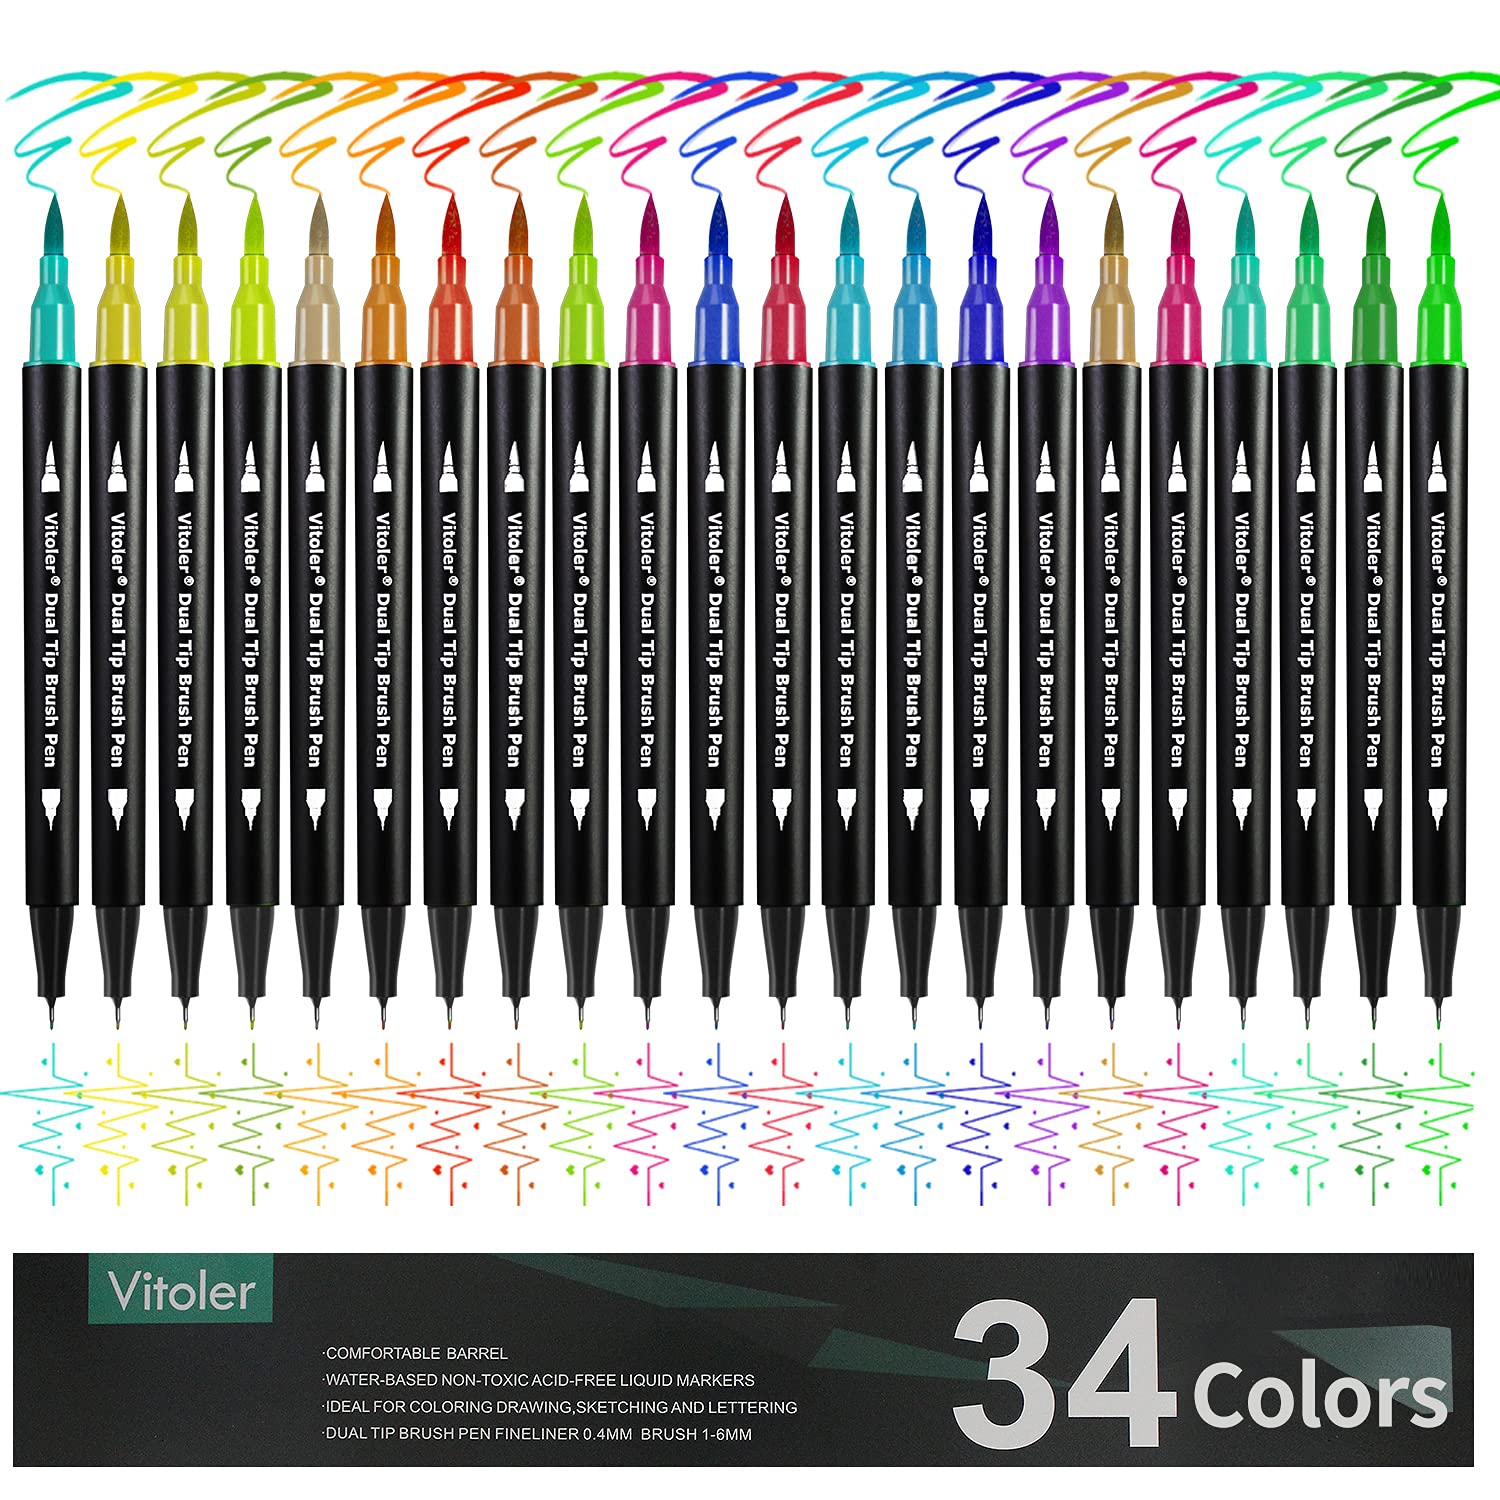 Colorful Creations Dual Tip Brush Markers - Vibrant Fine Point Journal Pens for Kids and Adults. Perfect for Coloring, Drawing, Planning, Calendars, and Art Projects. Includes 34 C